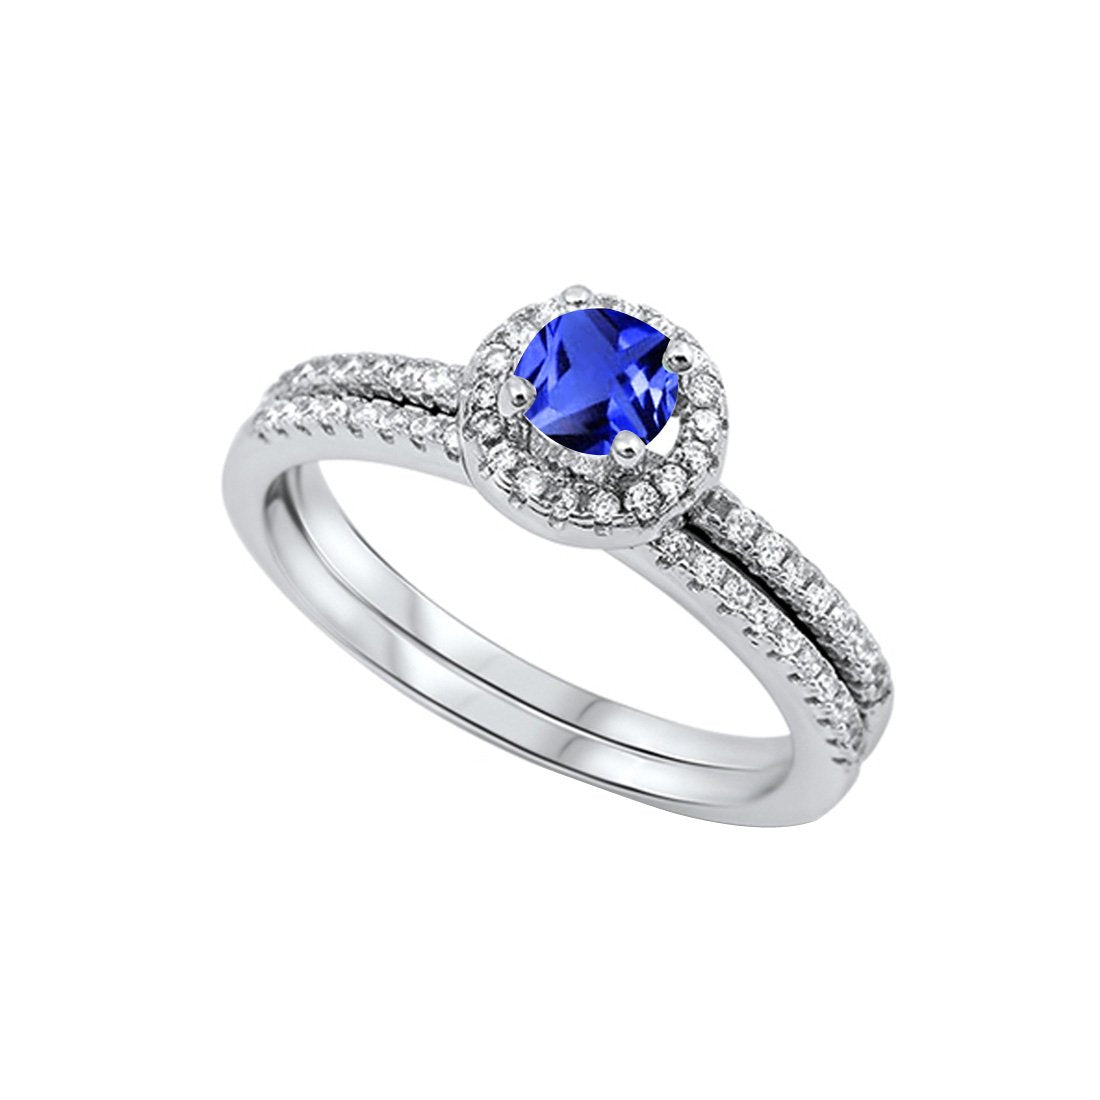 Accent Dazzling Round Simulated Blue Sapphire CZ Wedding Ring 925 Sterling Silver